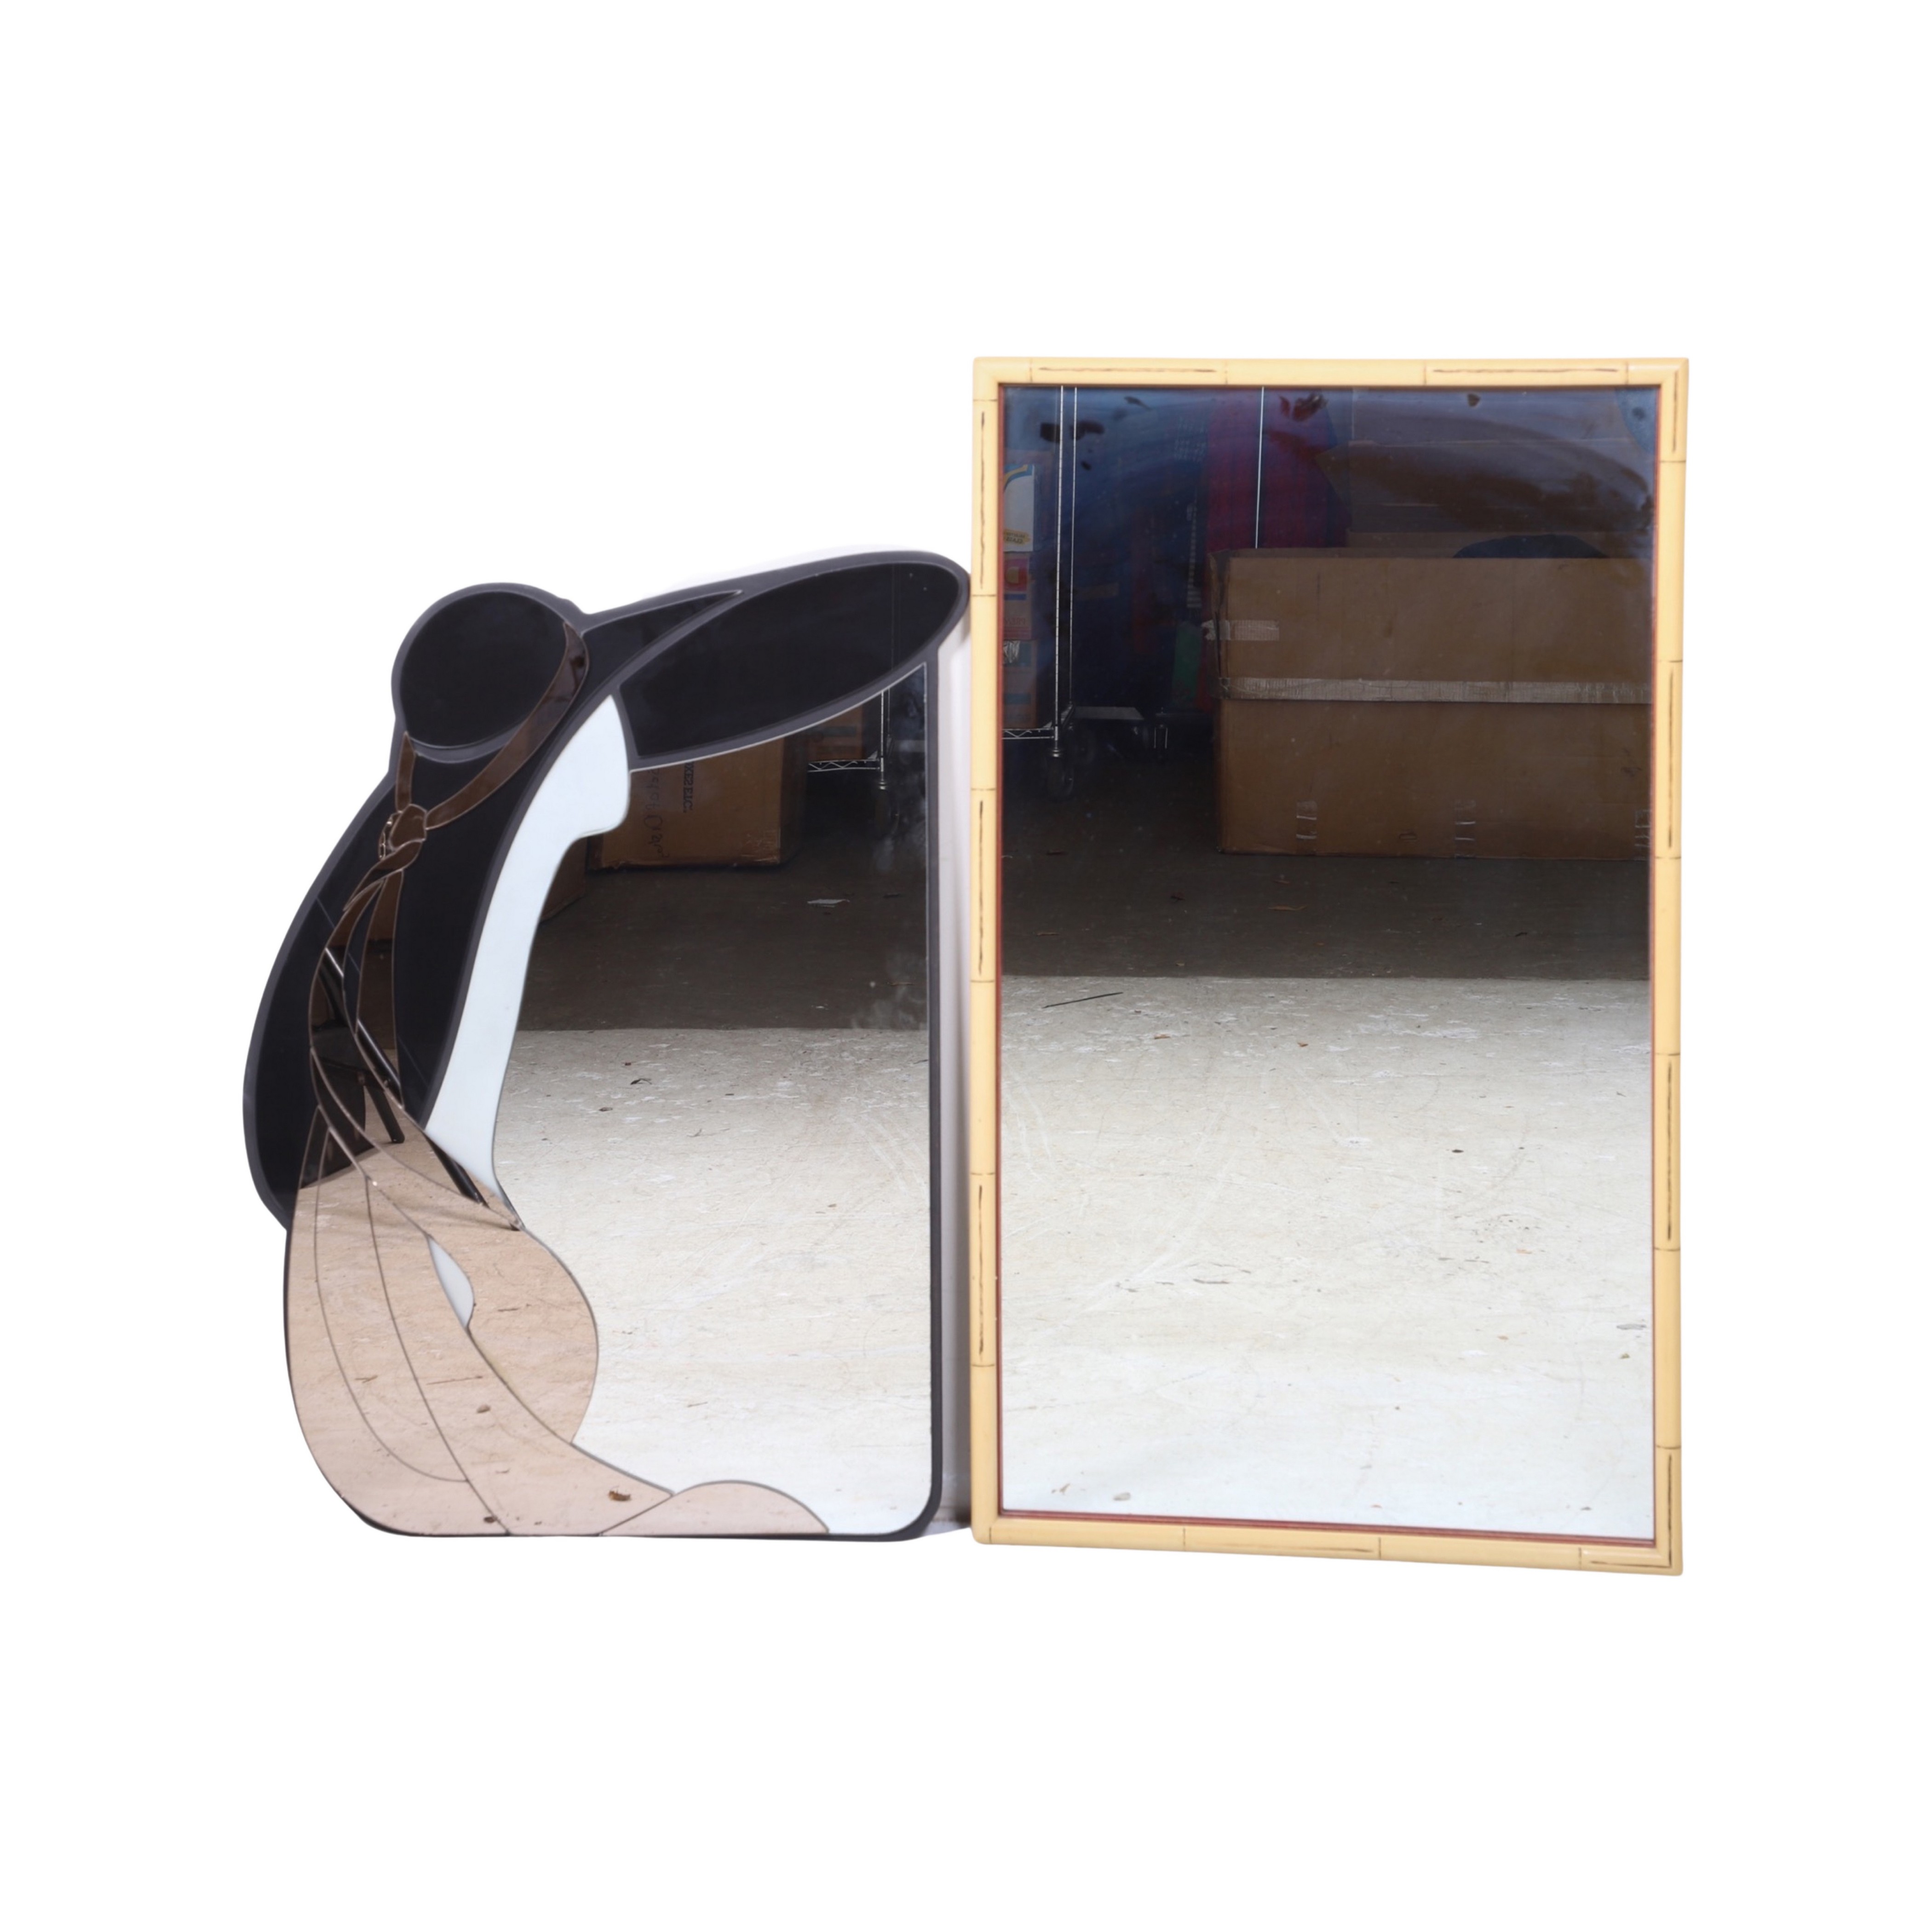  2 Modern hanging wall mirrors  30fe6a